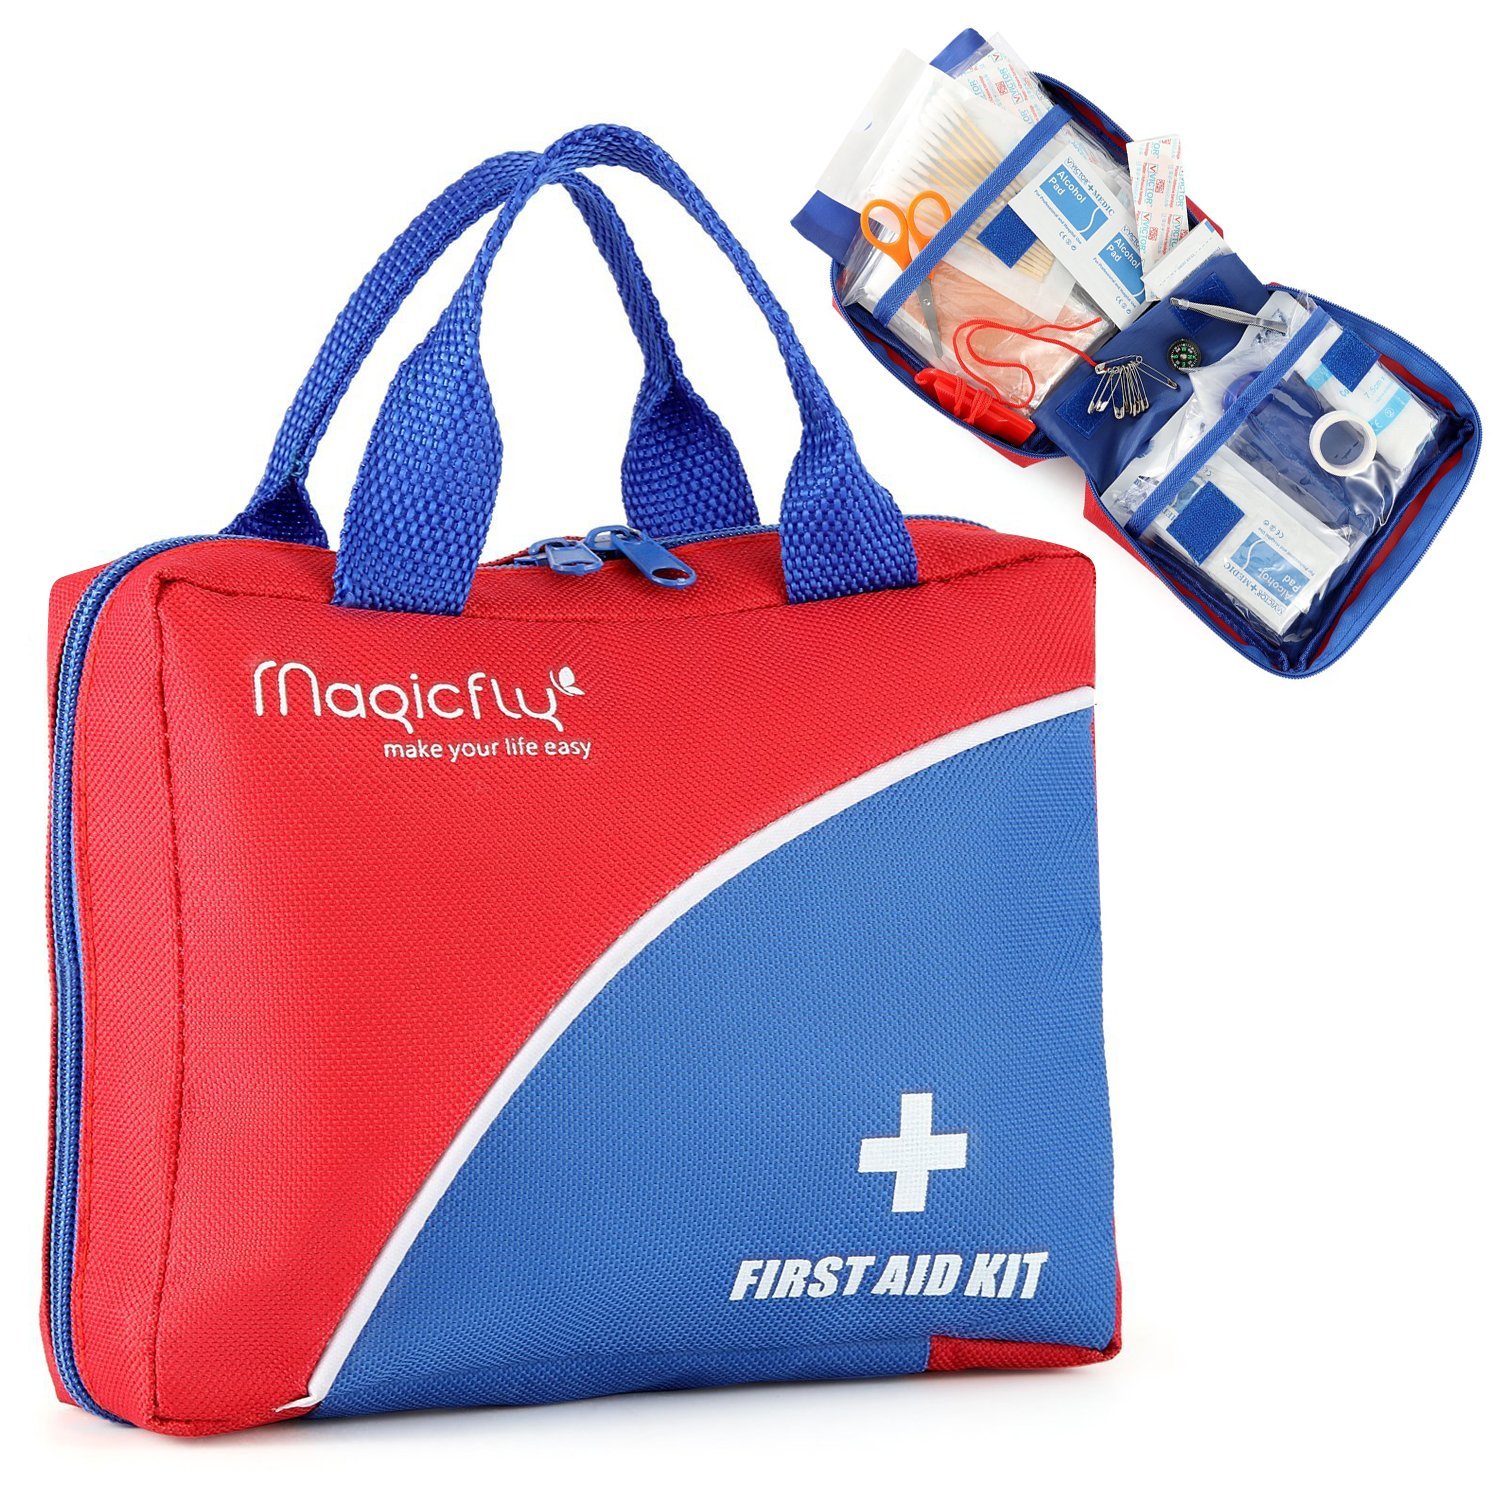 Magicfly 126-piece first aid kit for $13